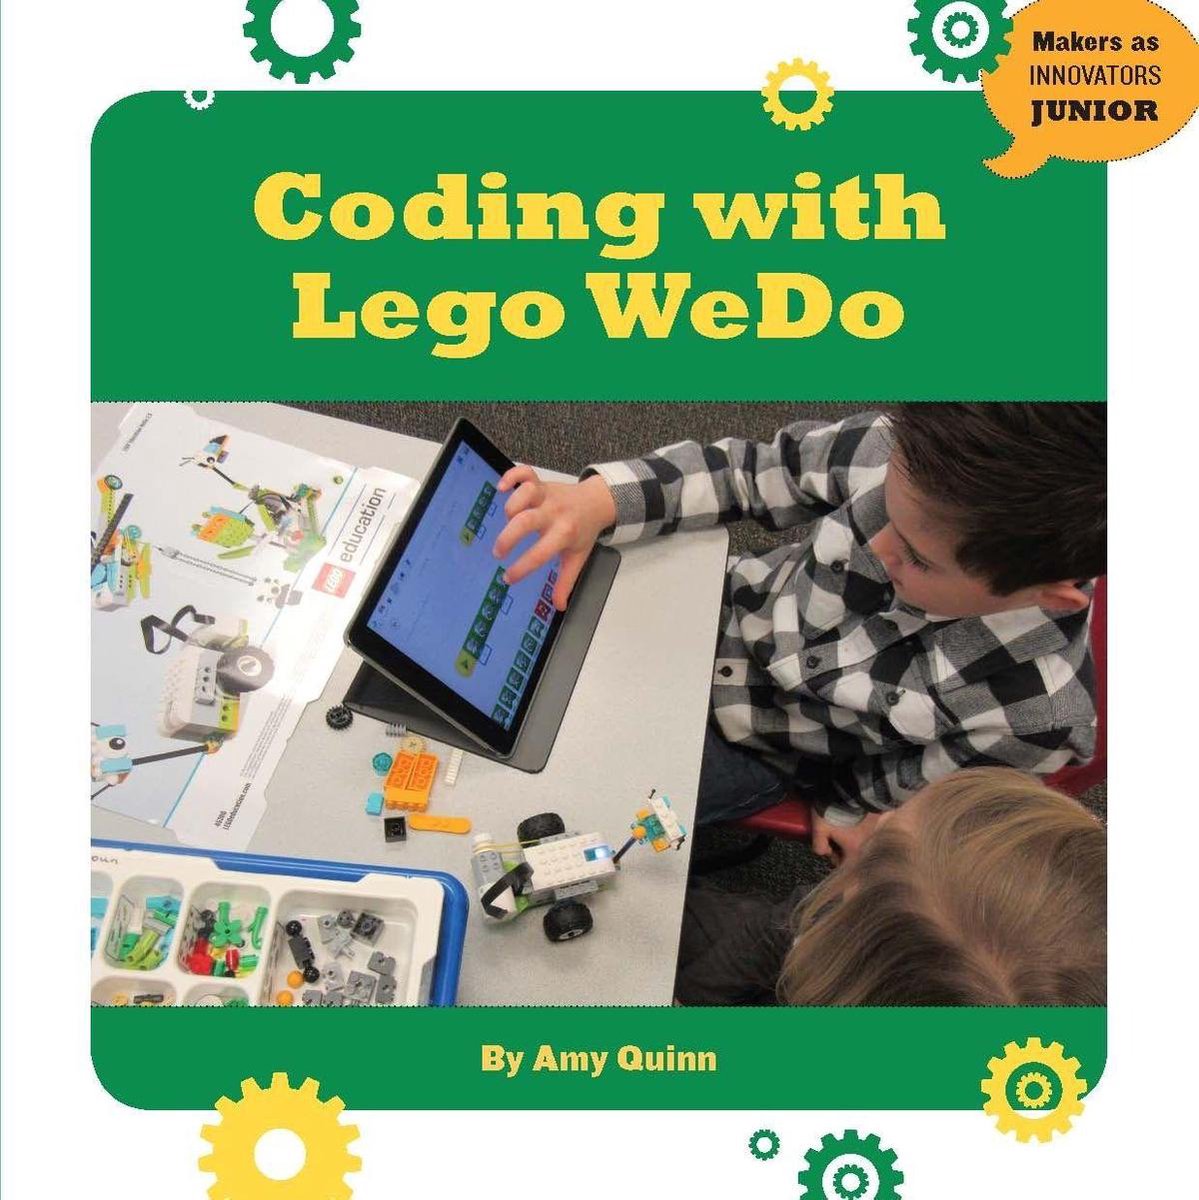 21st Century Skills Innovation Library: Makers as Innovators Junior - Coding with LEGO WeDo - Amy Quinn